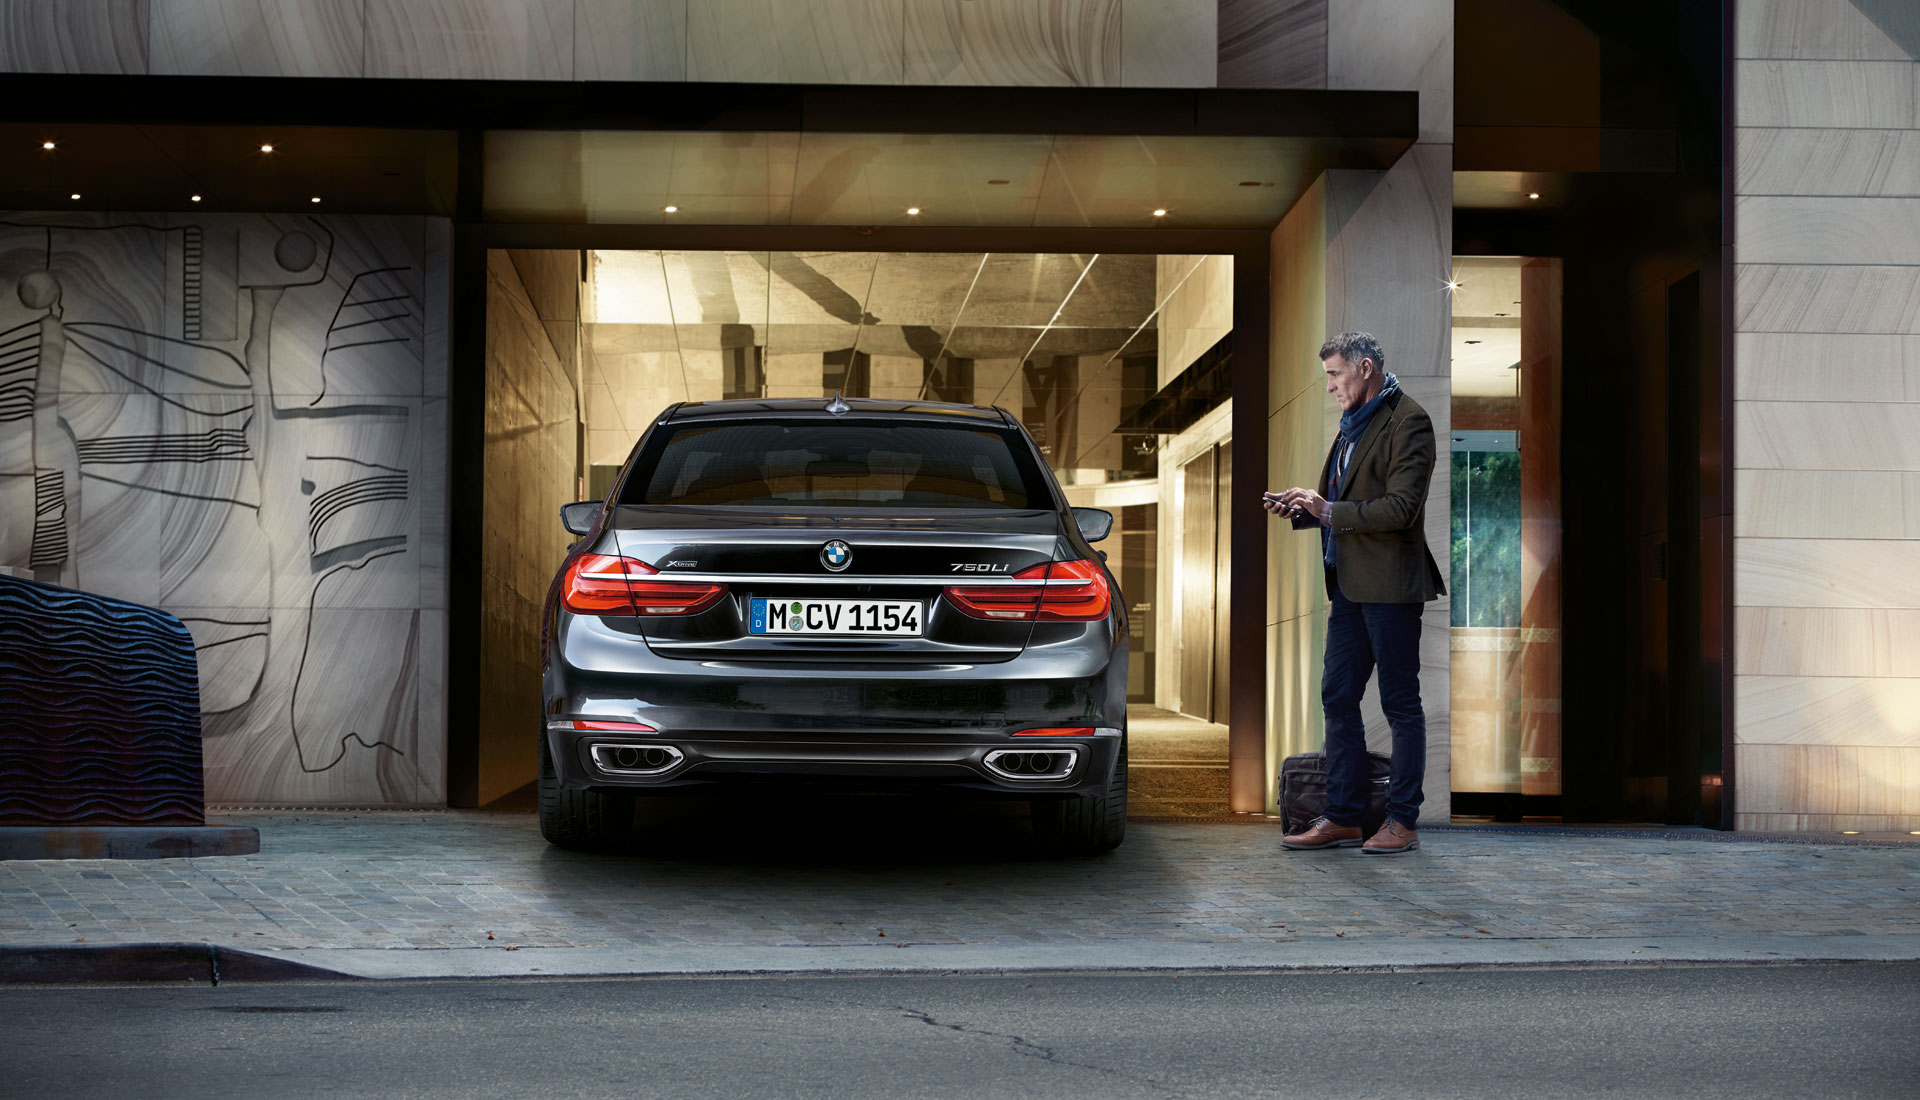 The new BMW 7 series